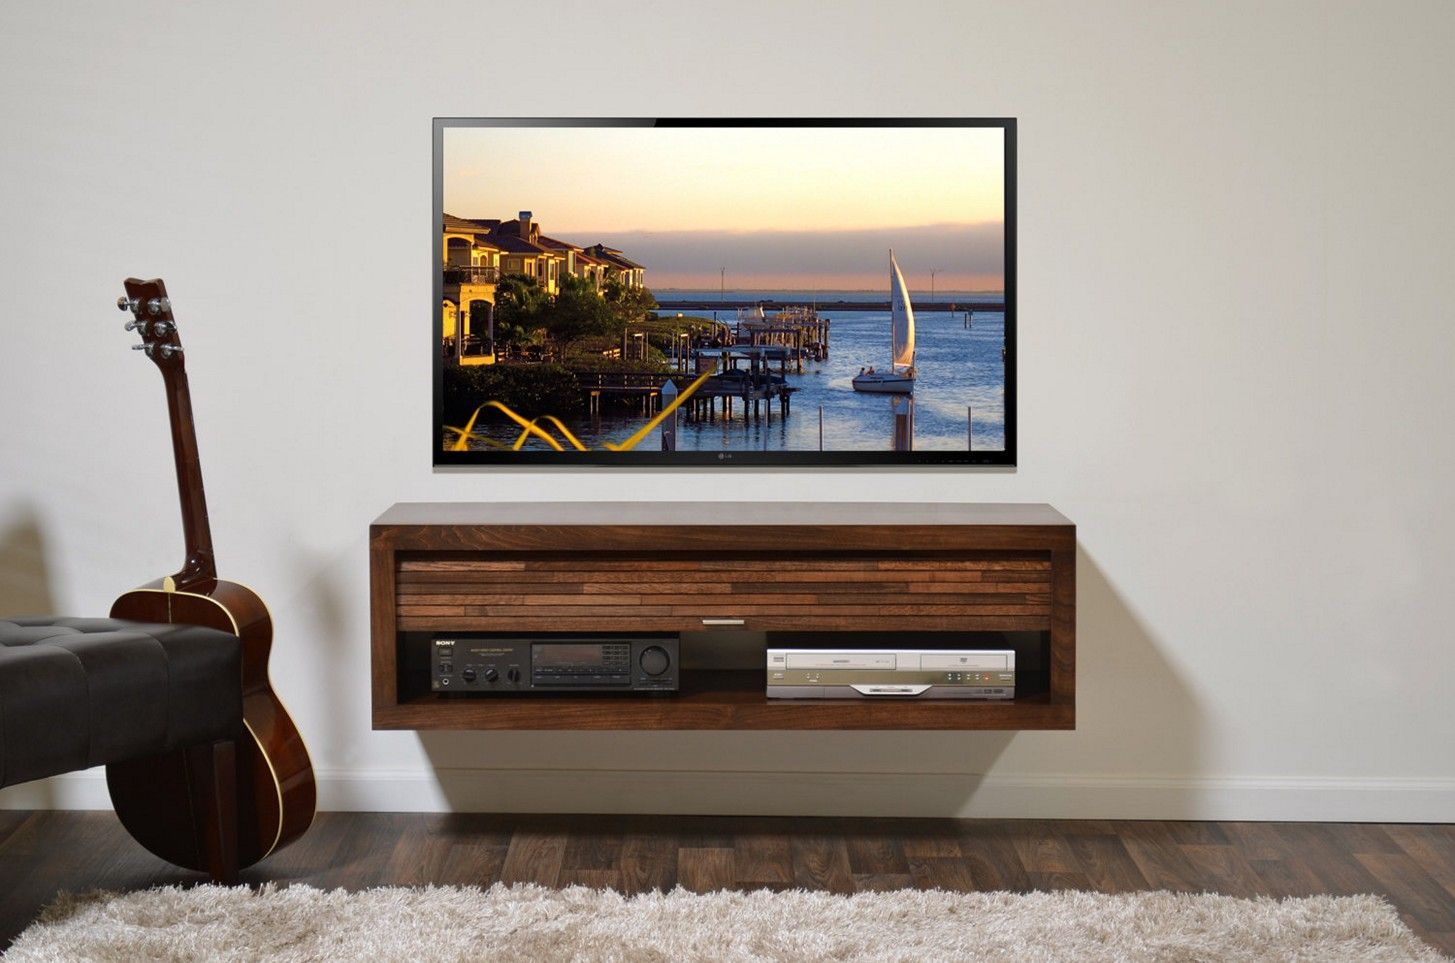 Diy Tv Stand Endless Choices For Your Room Interior Inside Alden Design Wooden Tv Stands With Storage Cabinet Espresso (View 5 of 15)